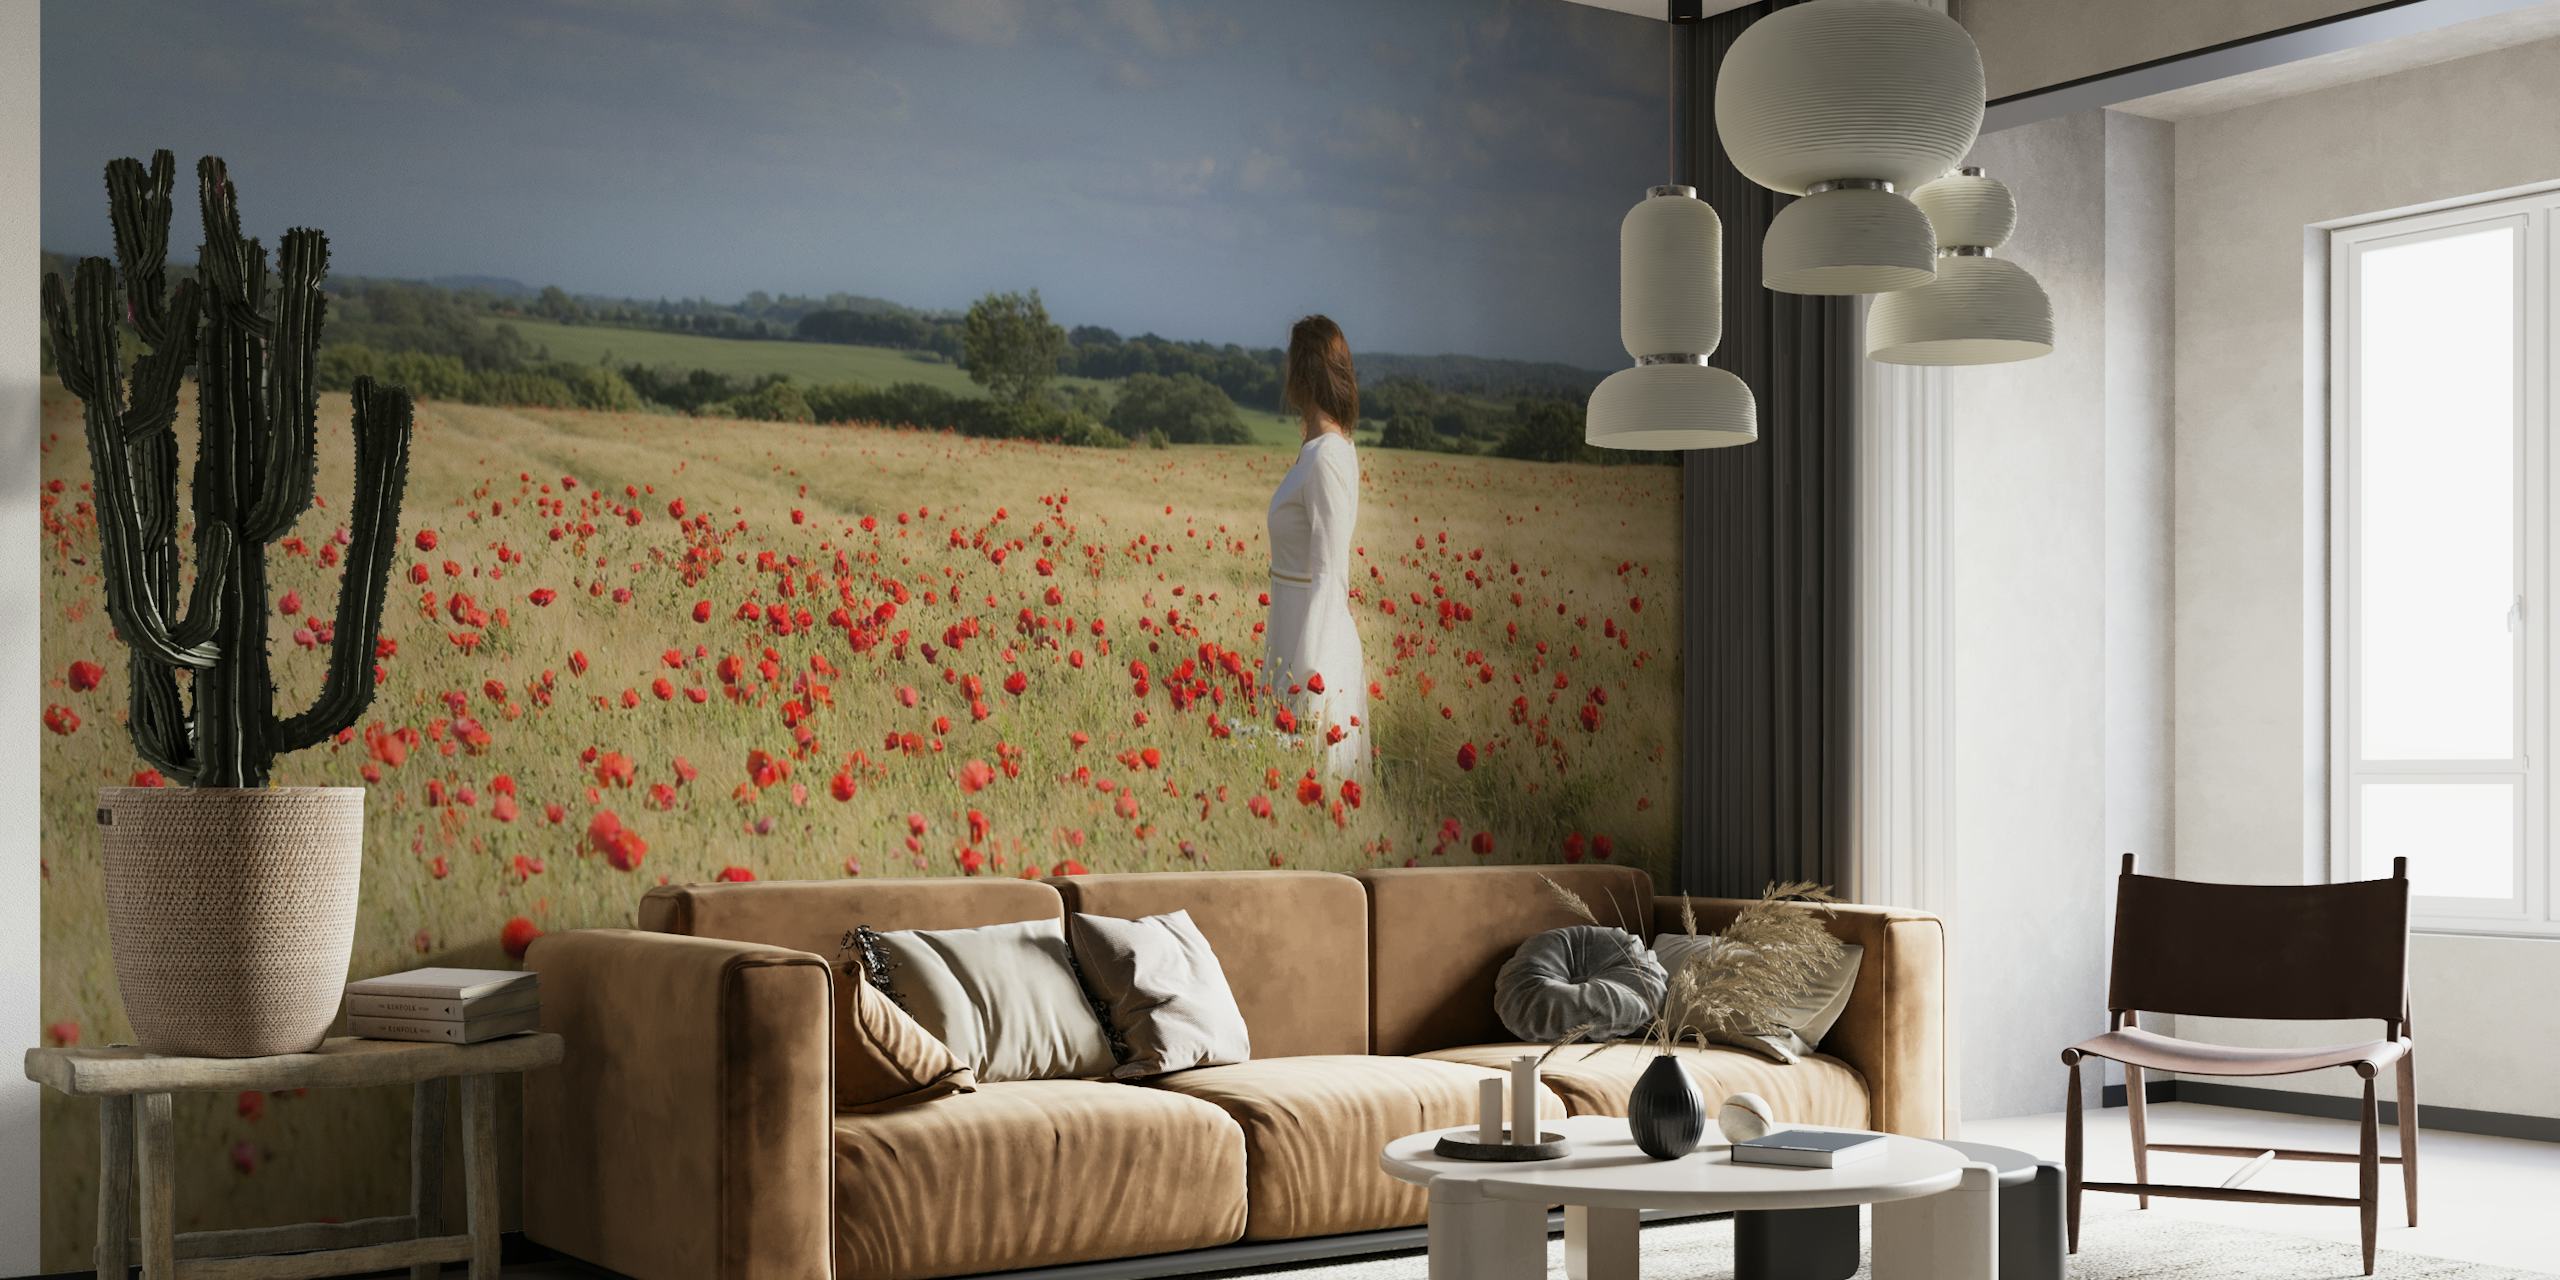 Person standing in a field of red poppies under a cloudy sky wall mural